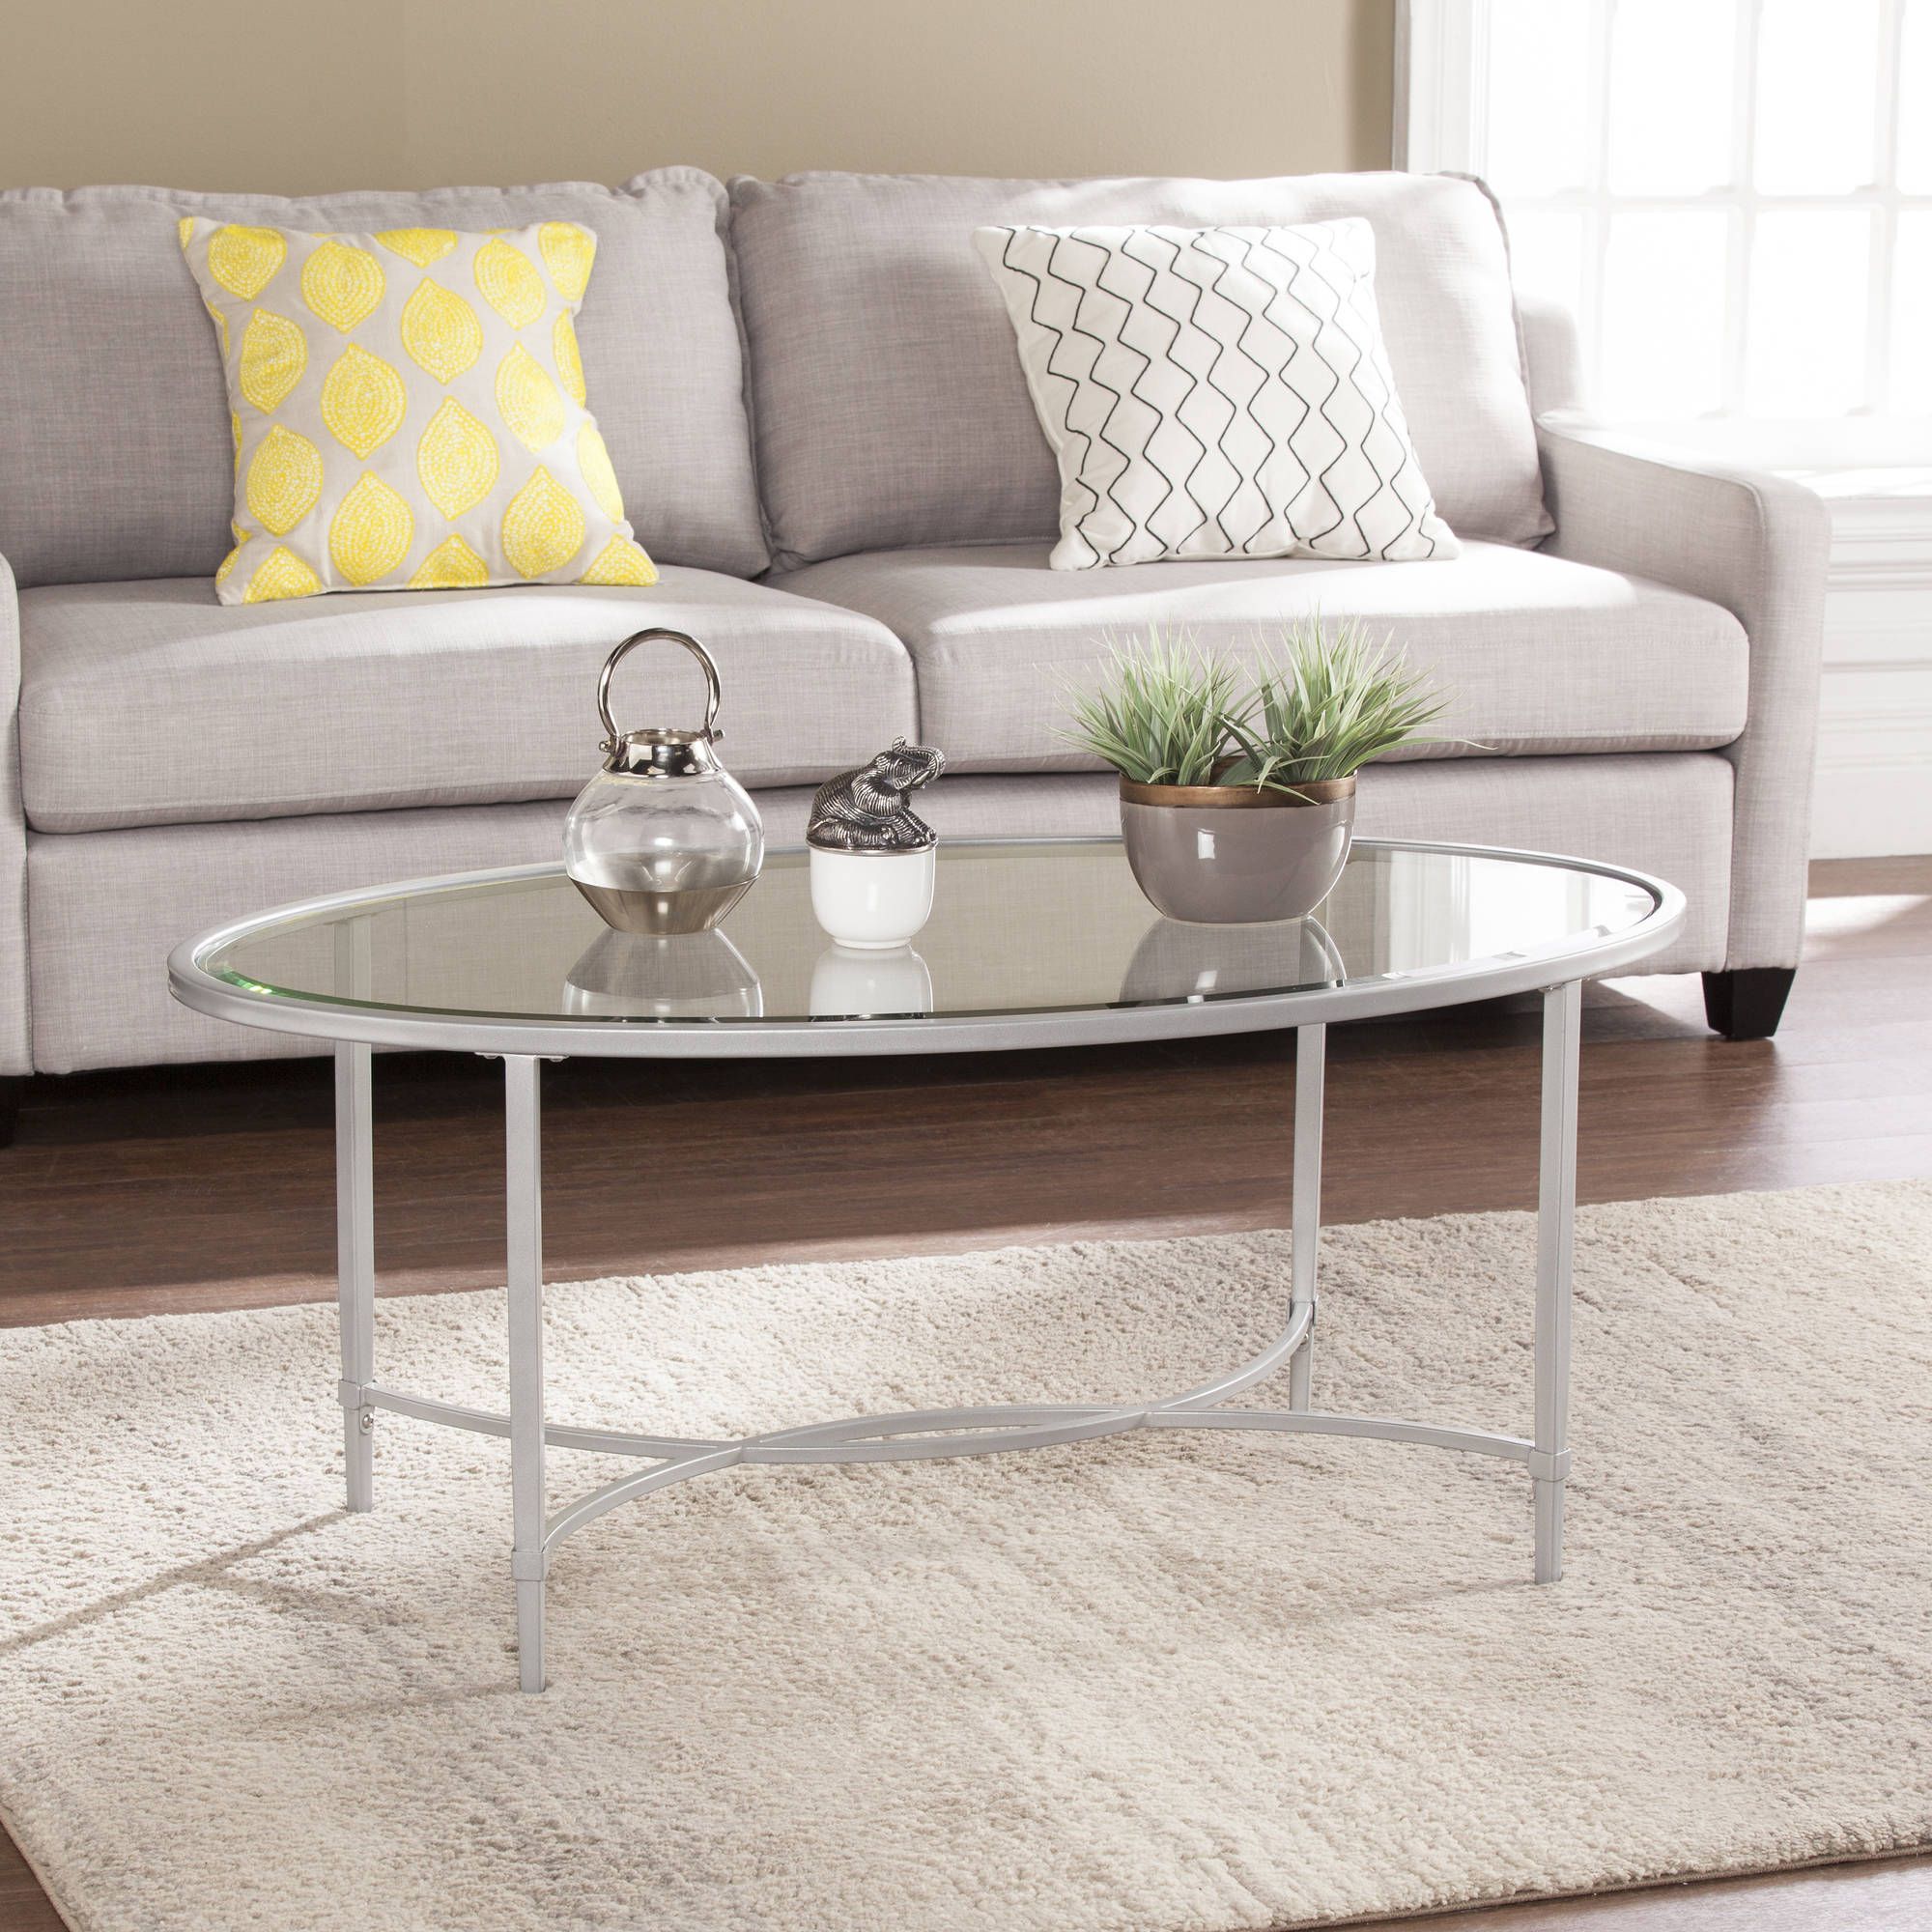 Quibilah Metal/glass Oval Coffee Table, Silver – Walmart With Preferred Metallic Silver Cocktail Tables (View 7 of 20)